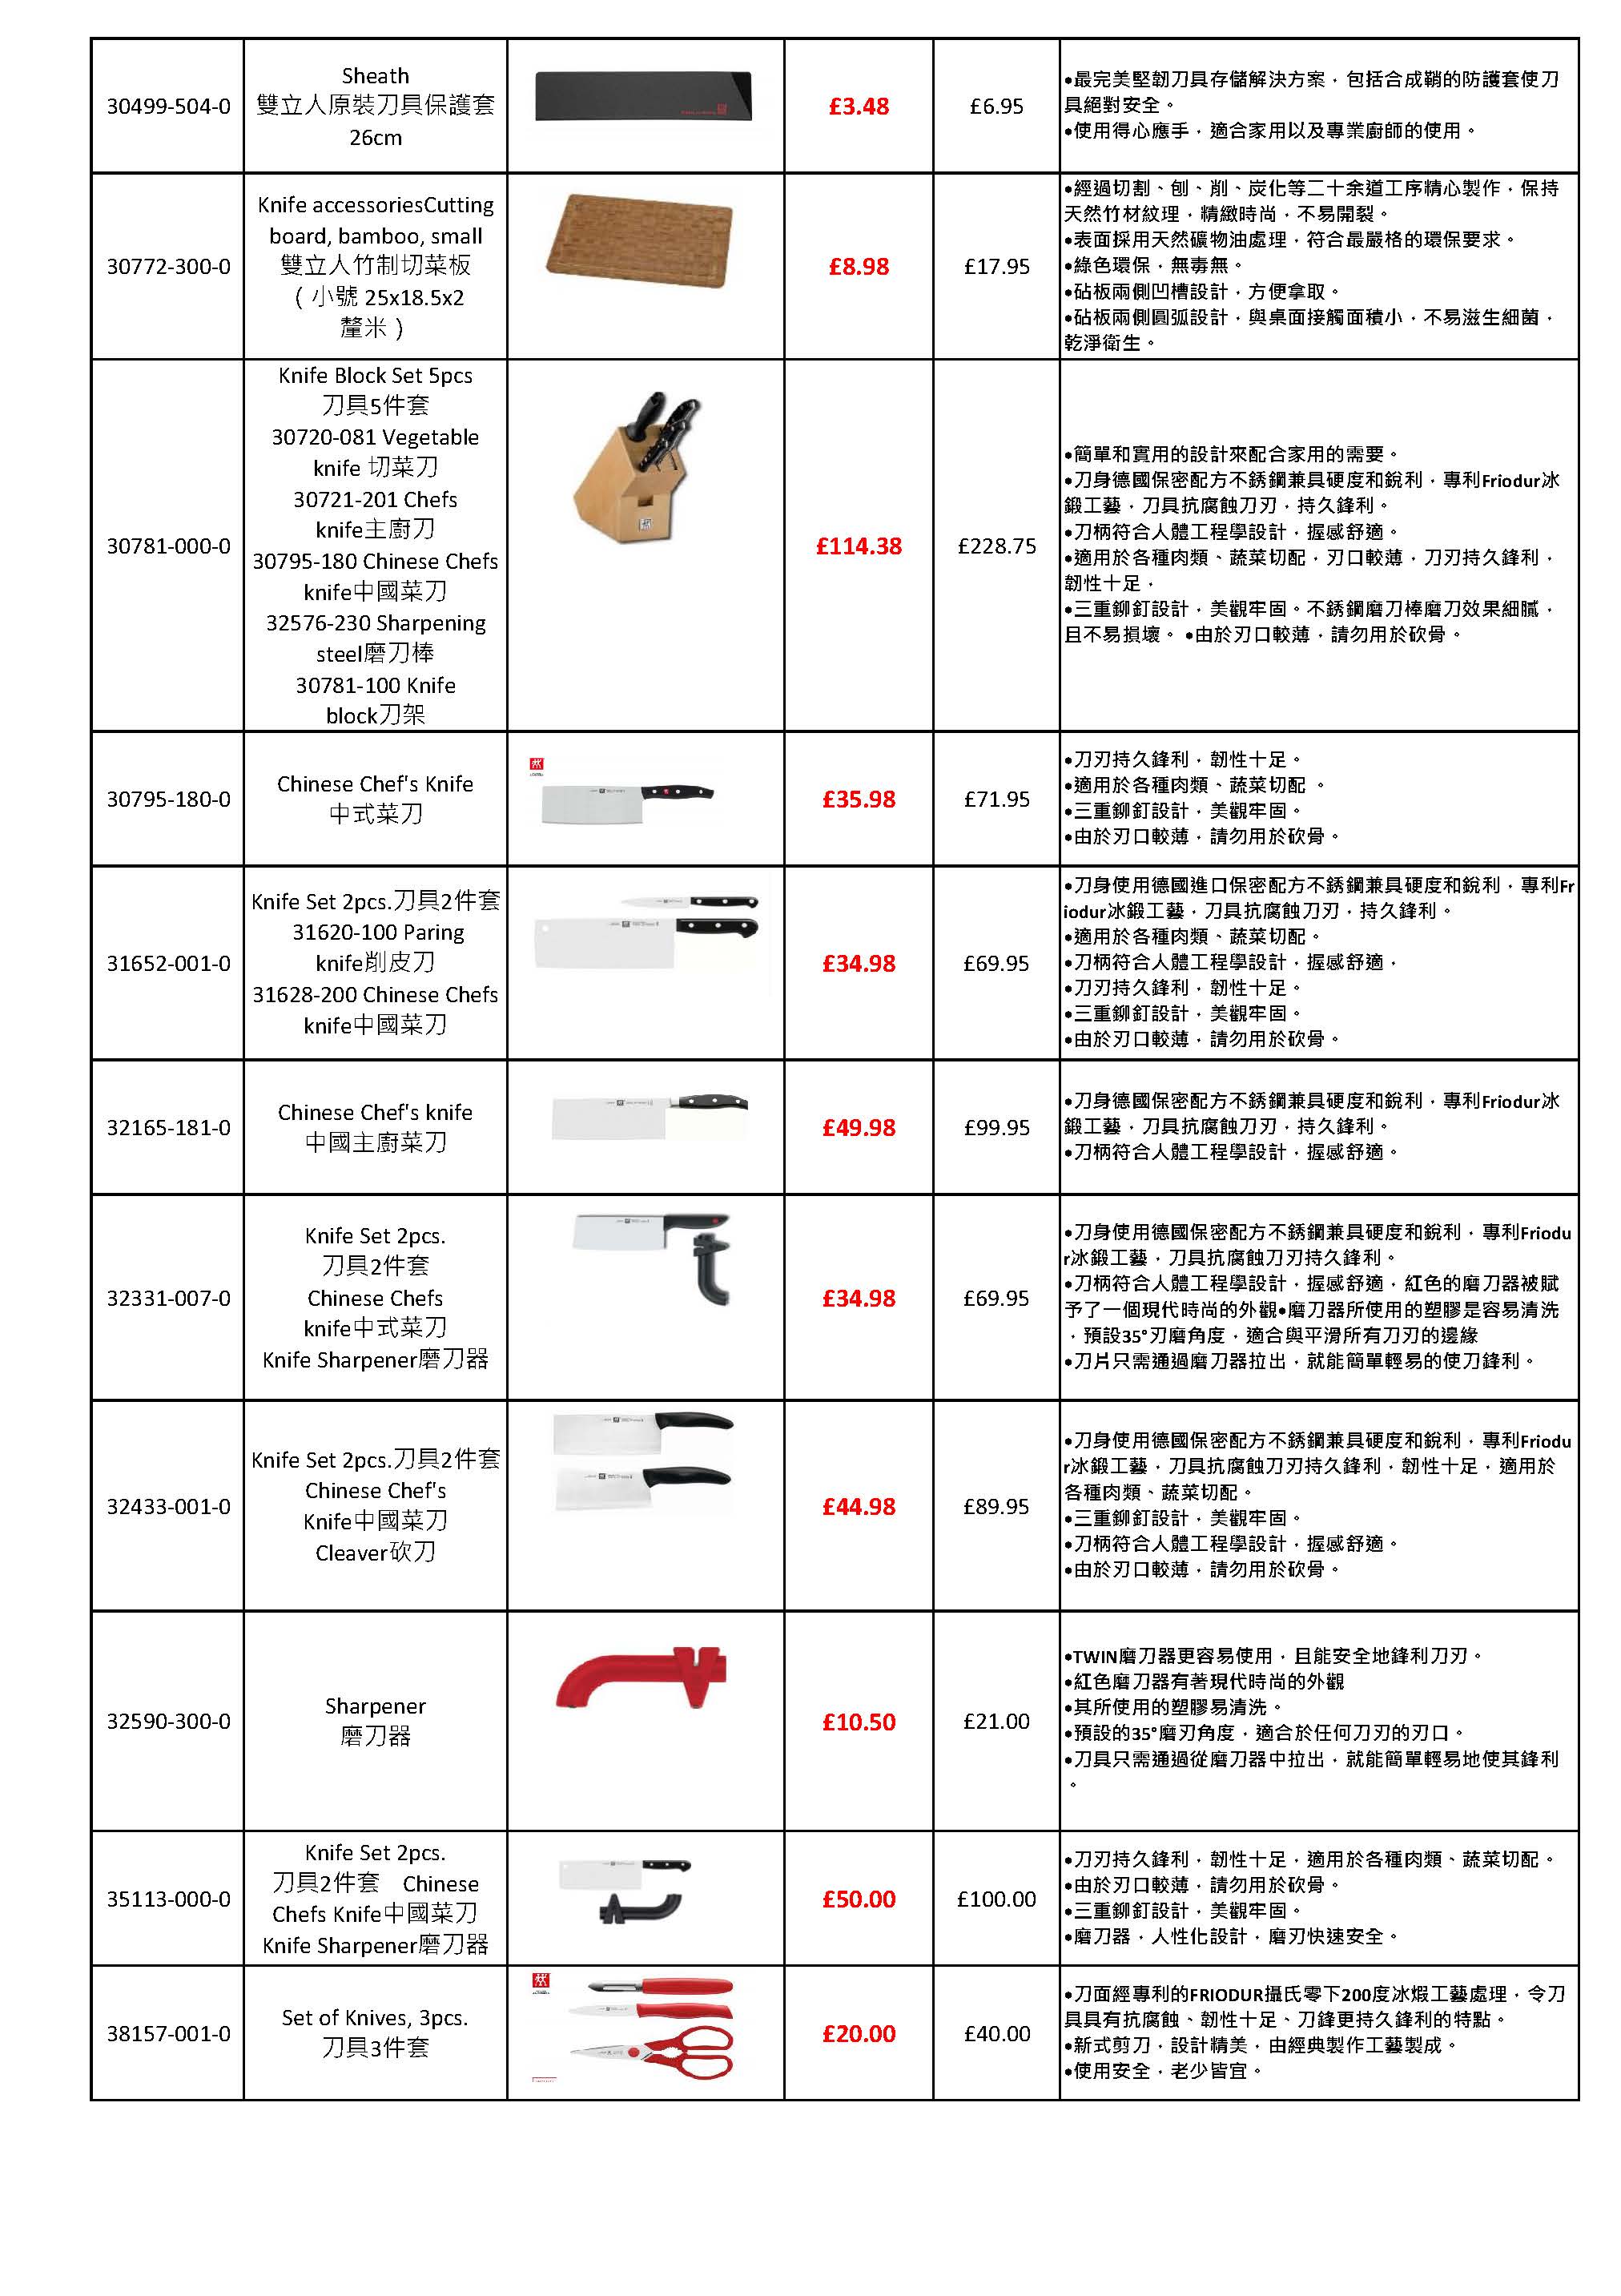 01032017 Britsense Full Sales List Traditional Chinese Version_Page_2.jpg